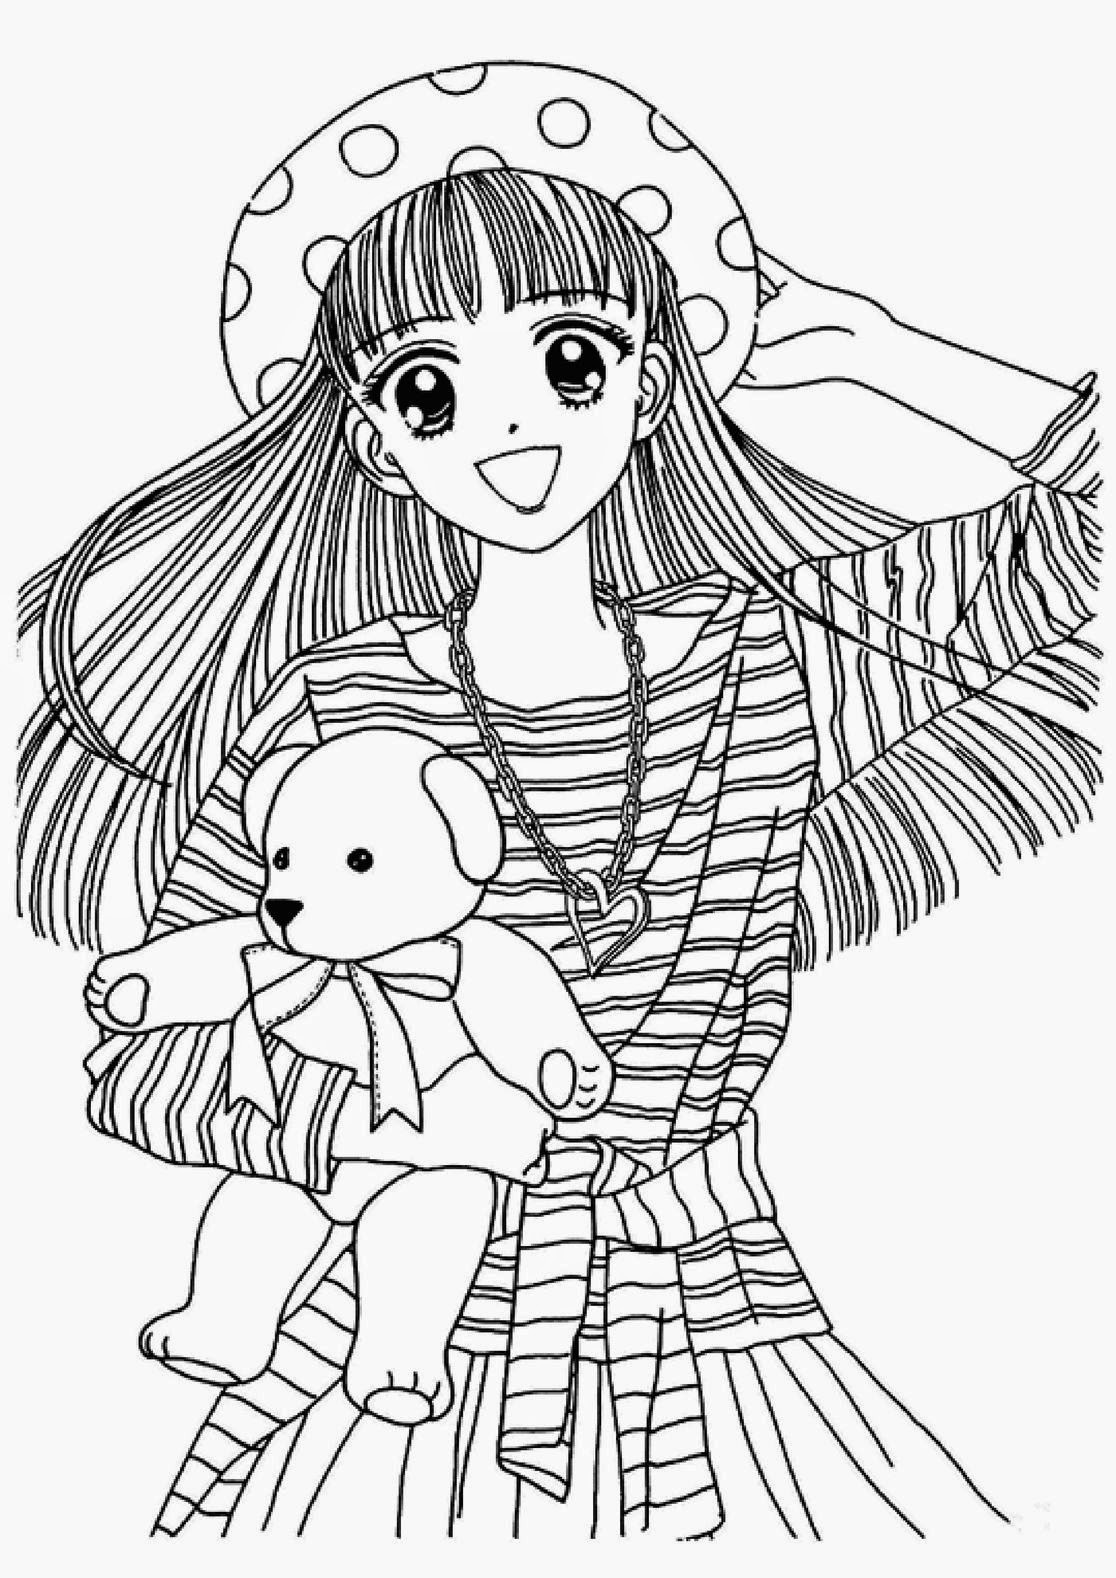 Manga Coloring Pages For Adults
 Anime Girl Coloring Pages coloringsuite